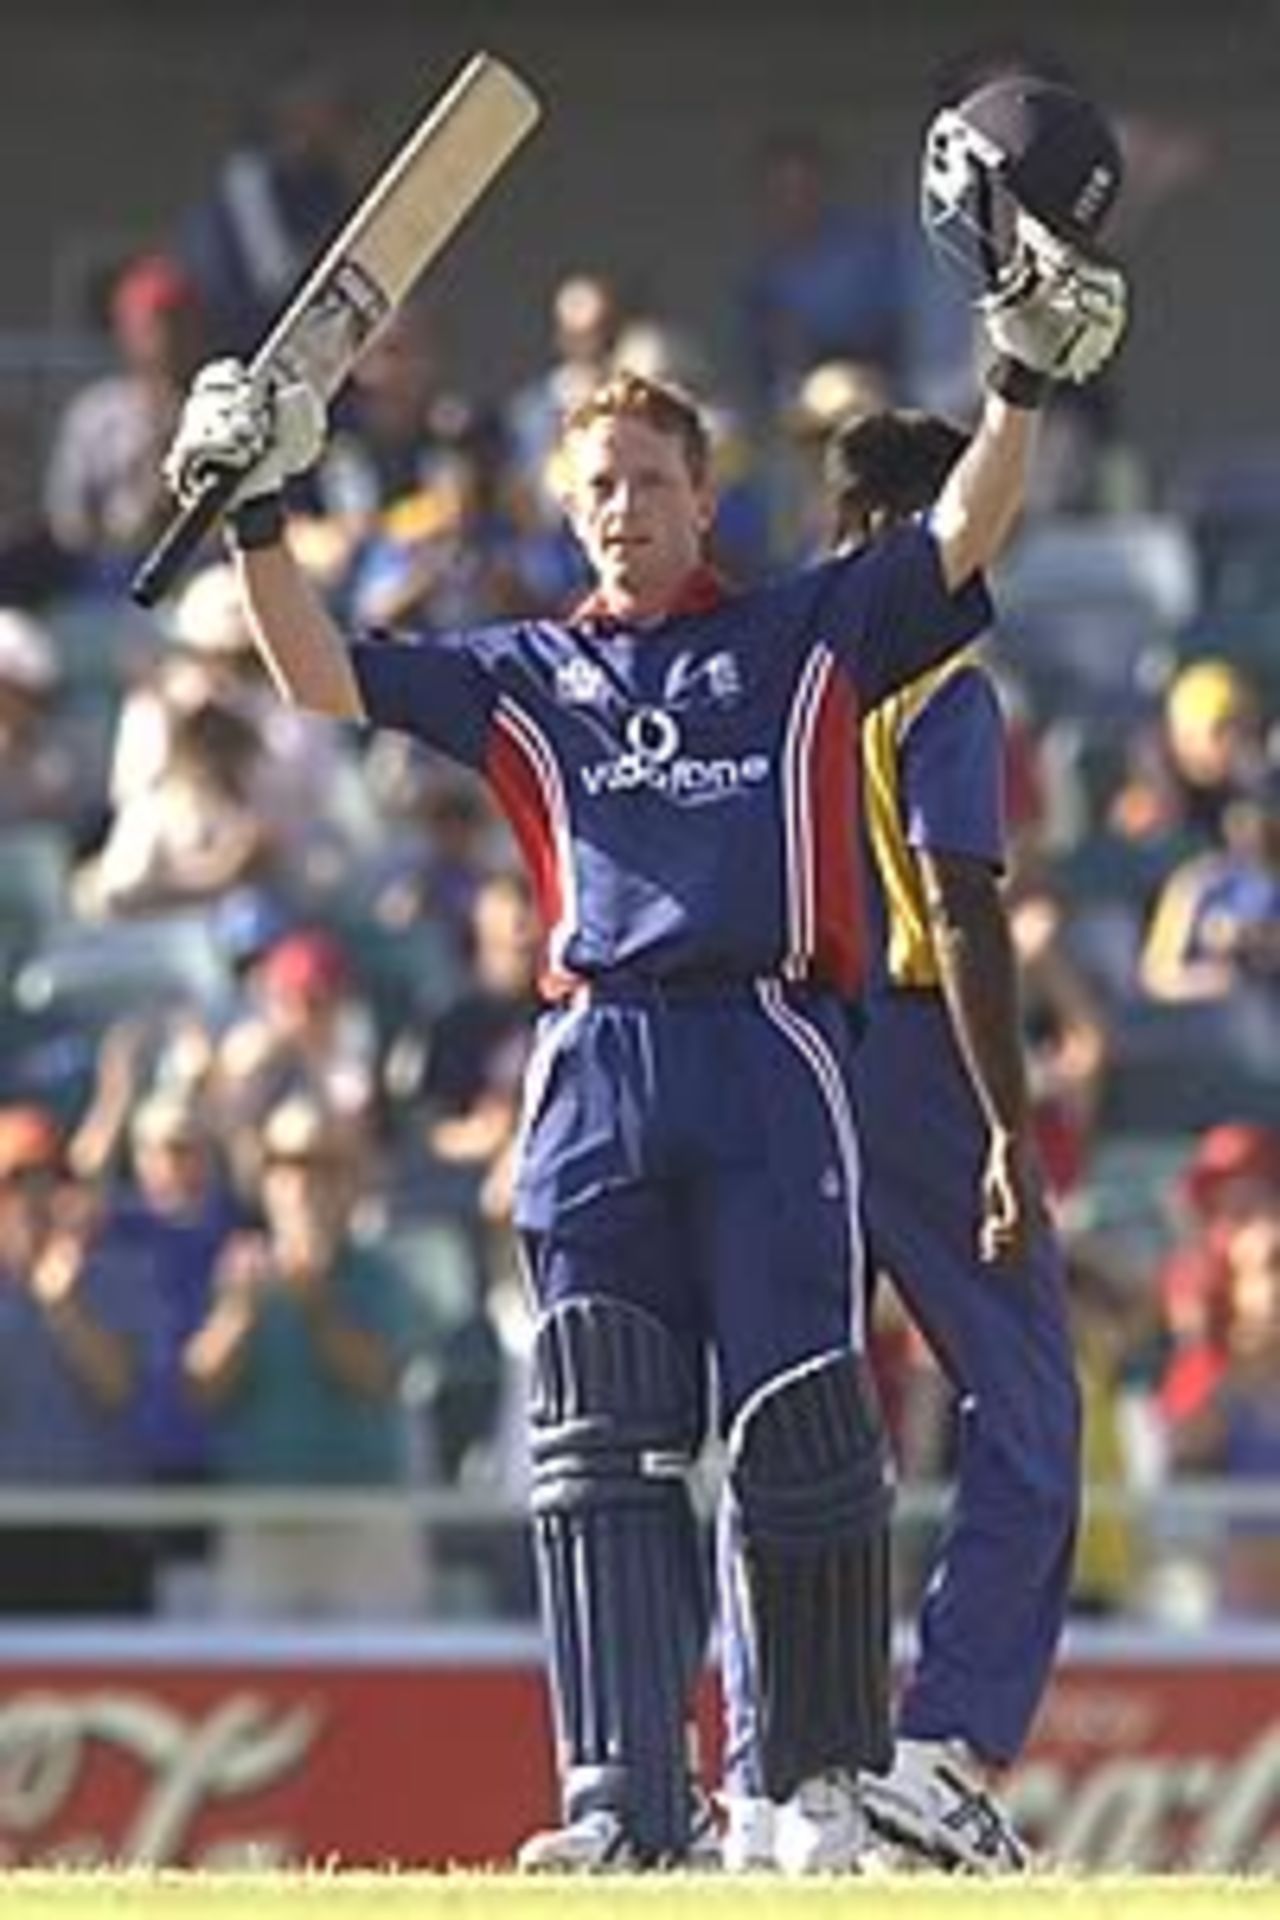 PERTH - DECEMBER 20: Paul Collingwood of England celebrates reaching his century during the One Day International match between England and Sri Lanka at the WACA ground in Perth, Australia on December 20, 2002.